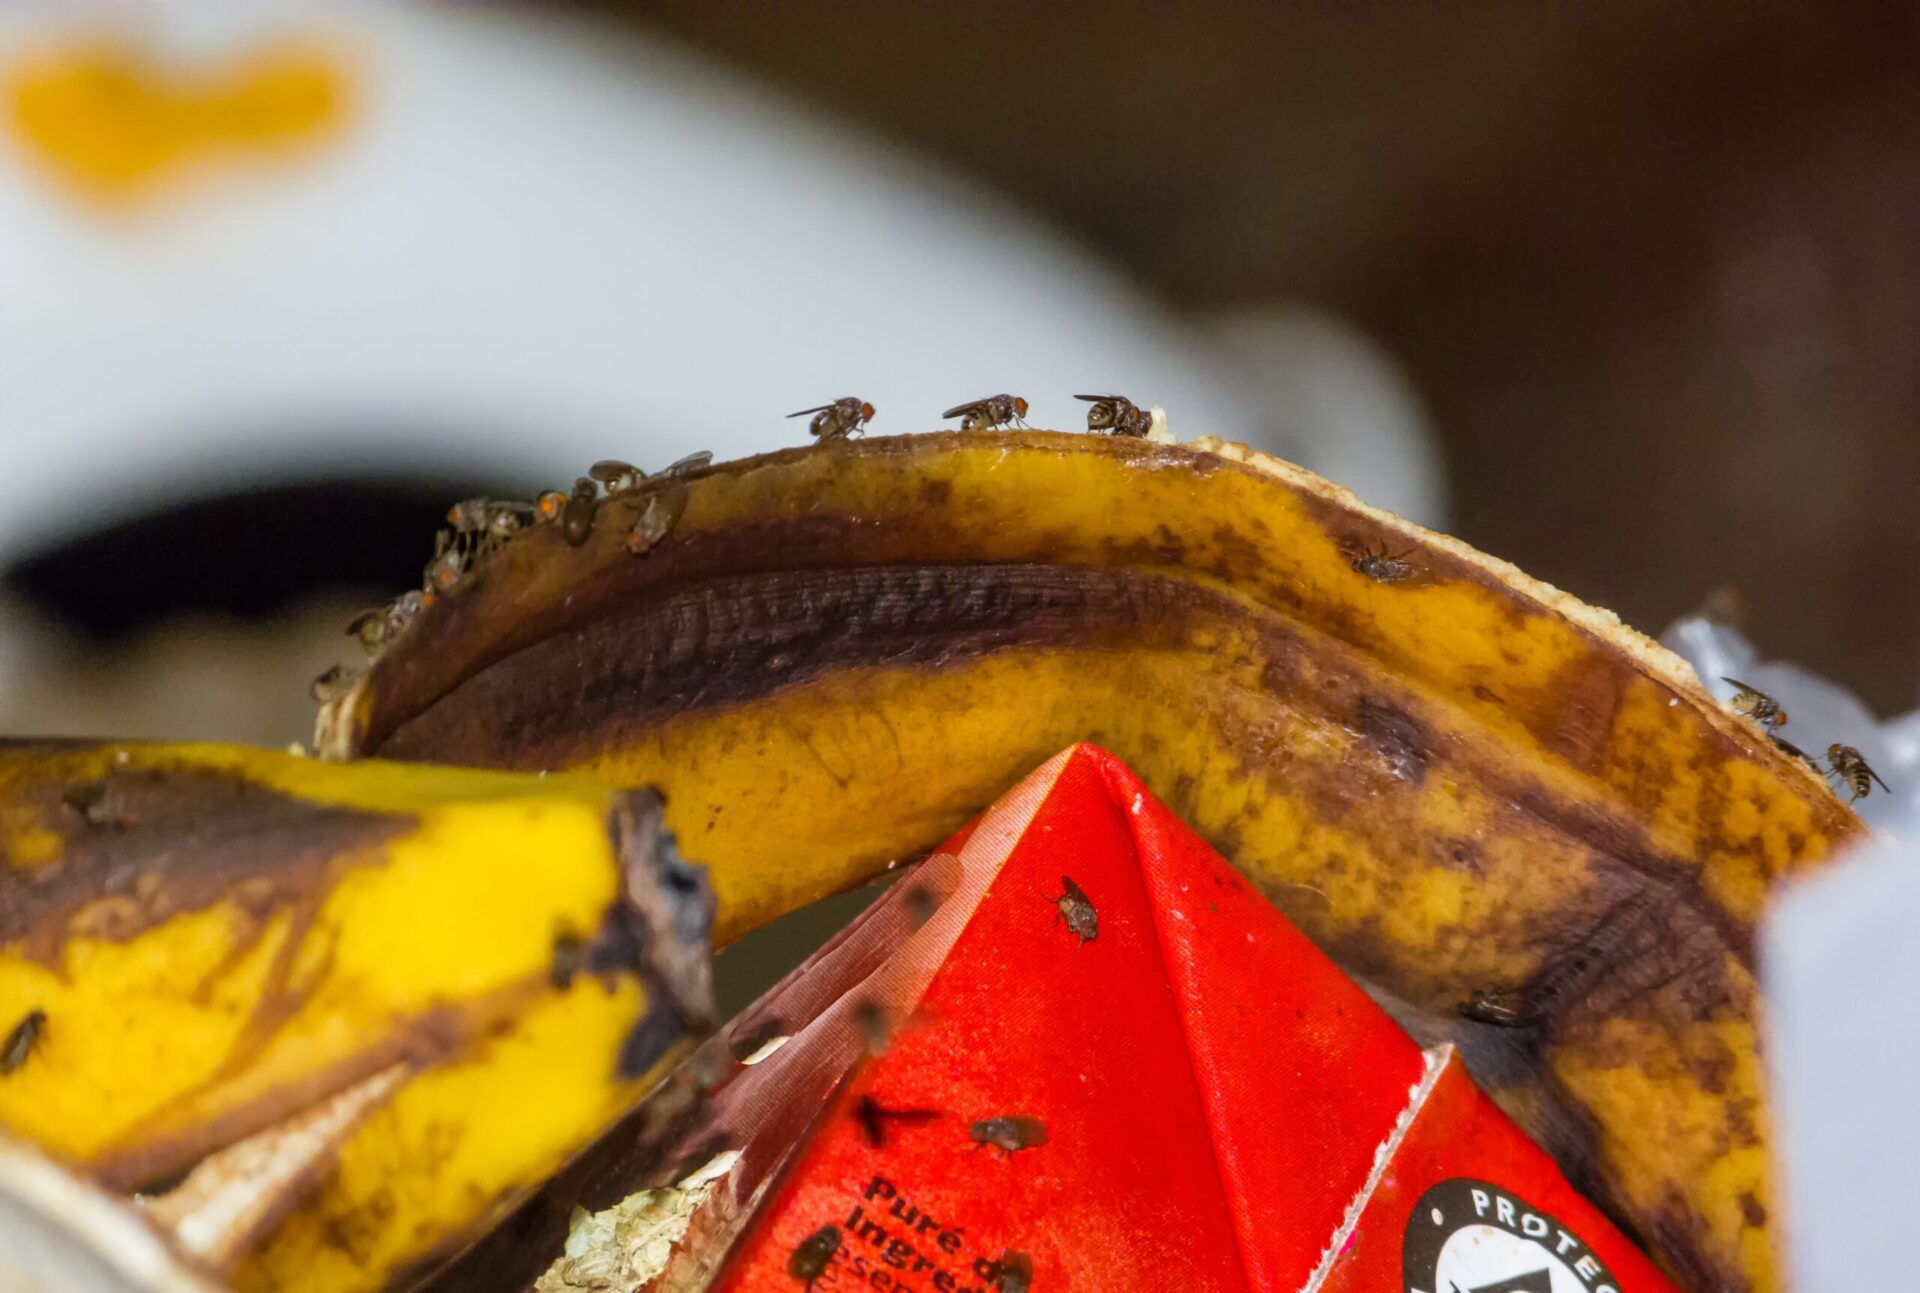 tiny brown fruit flies crawling over yellow banana peel and other food waste